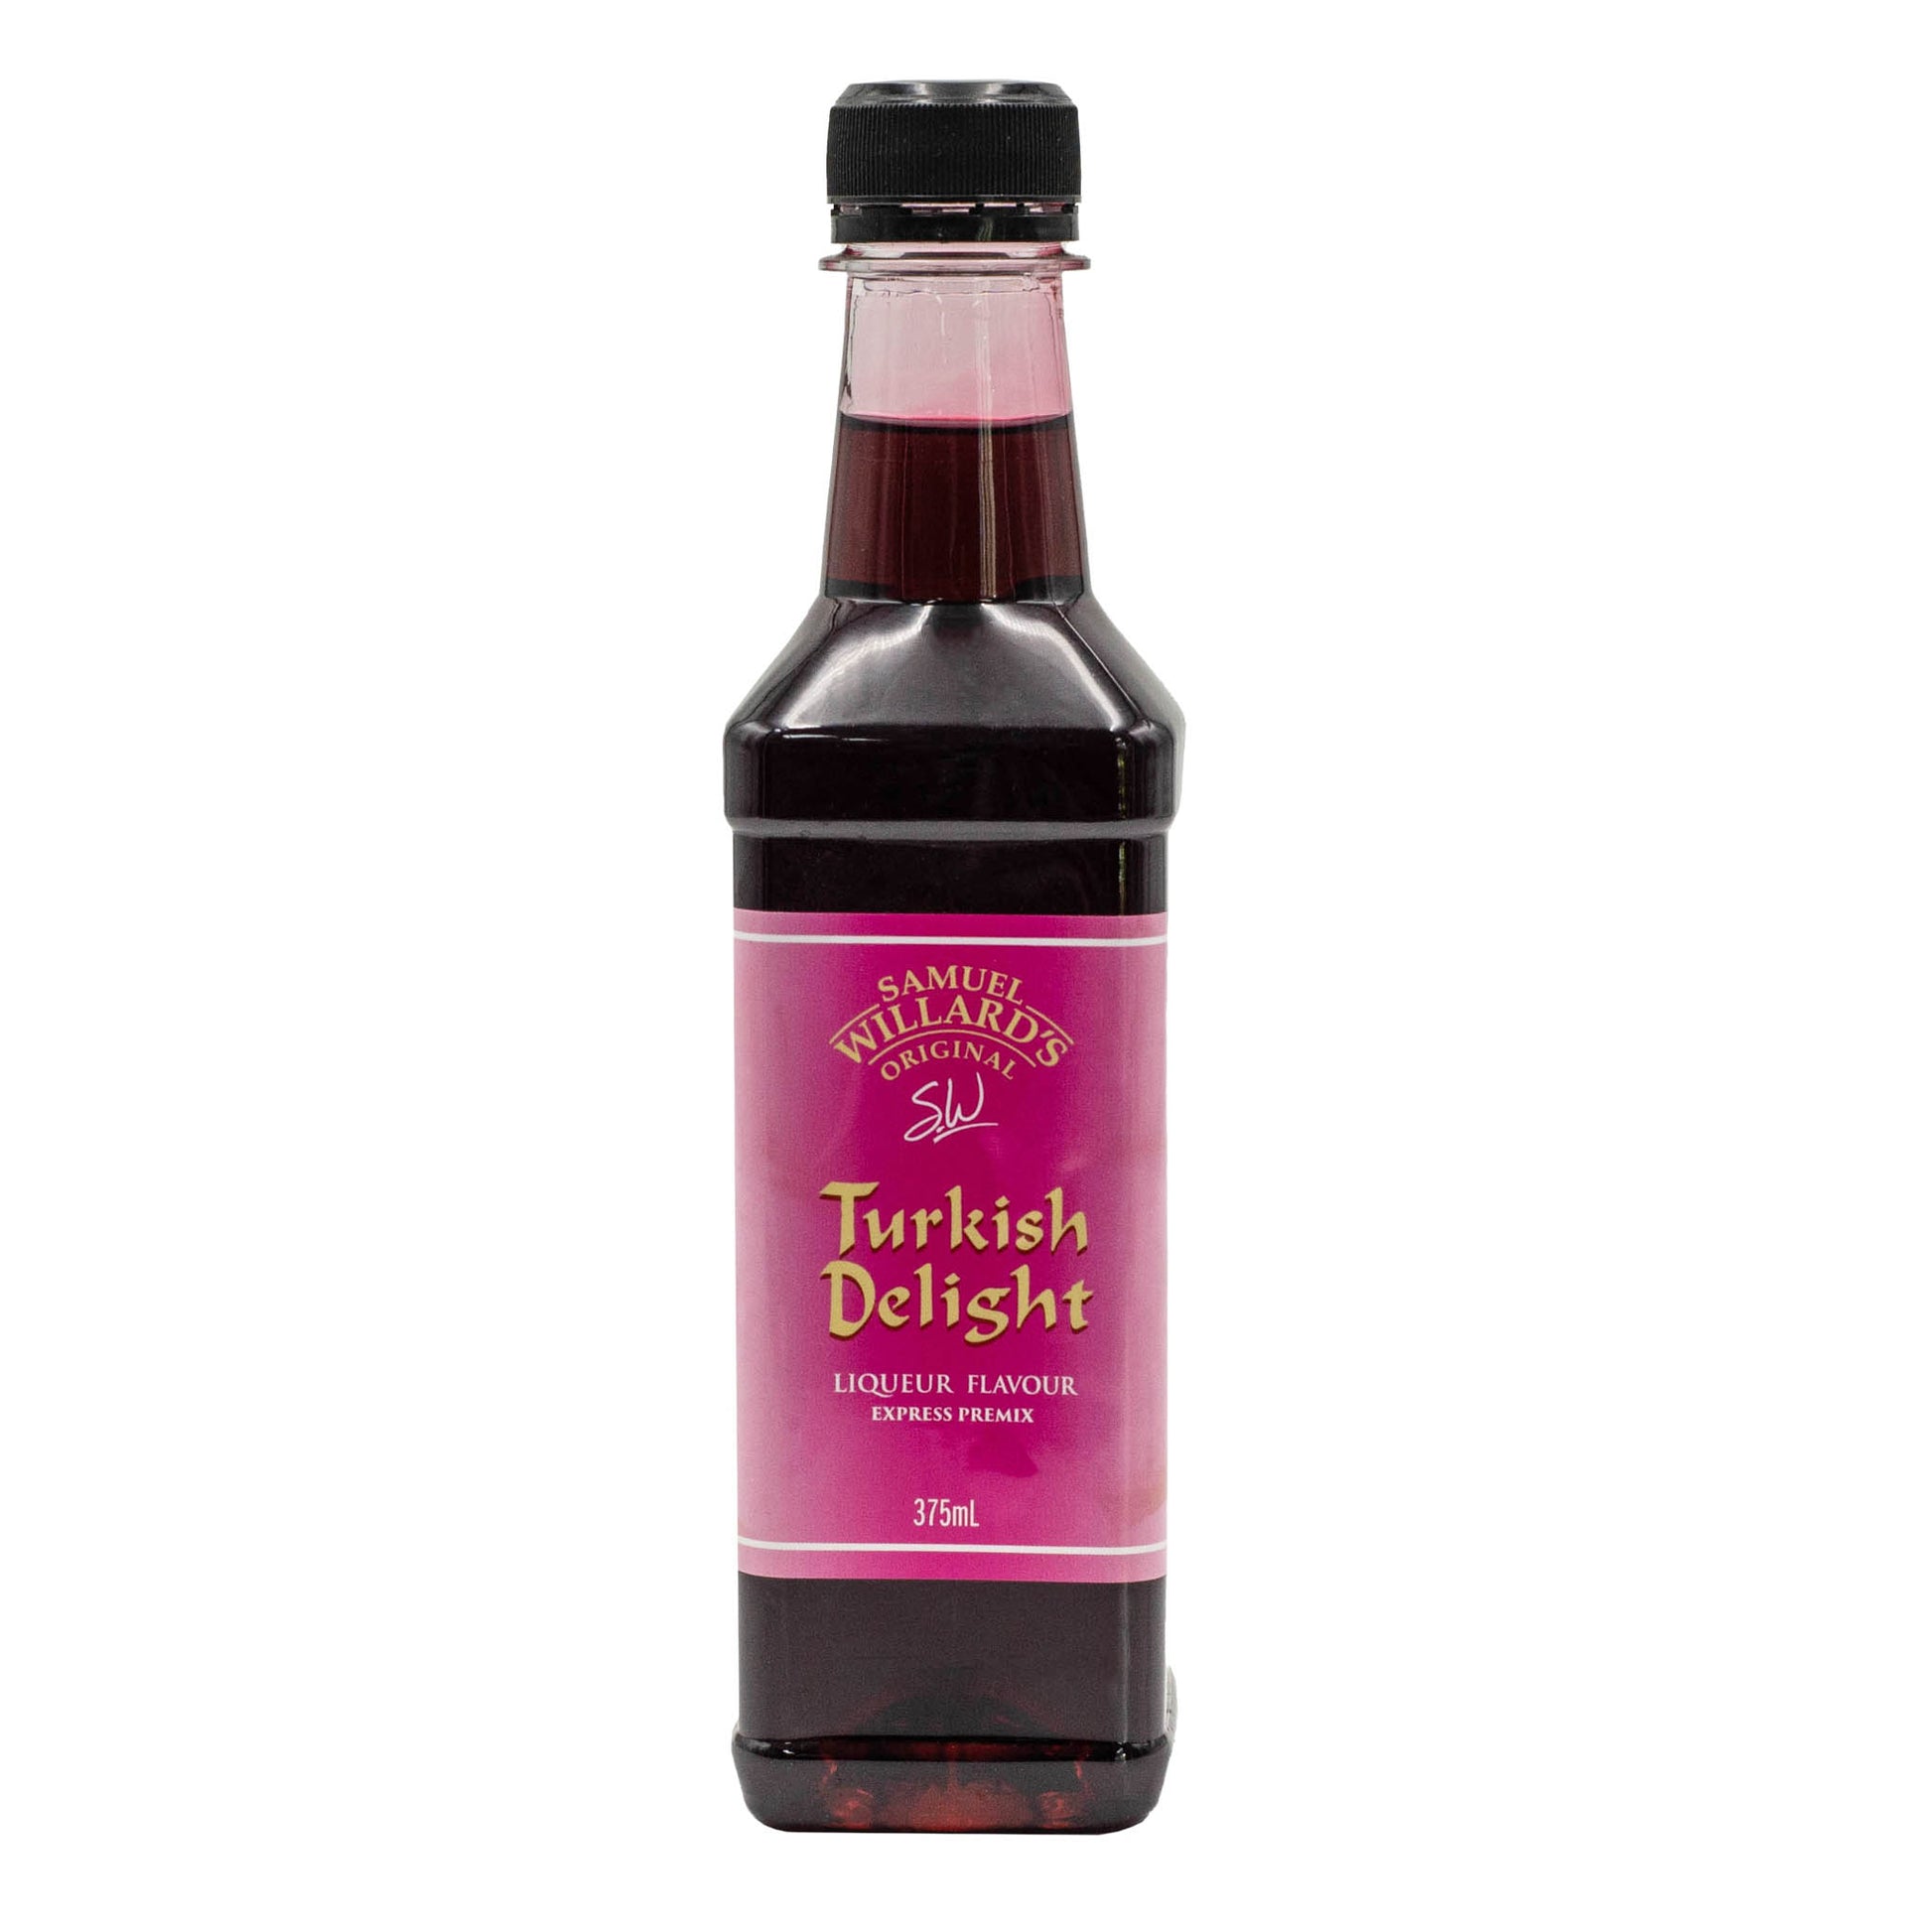 Samuel Willards Turkish Delight premix. Will make 1125mL of finished product from each 375mL bottle